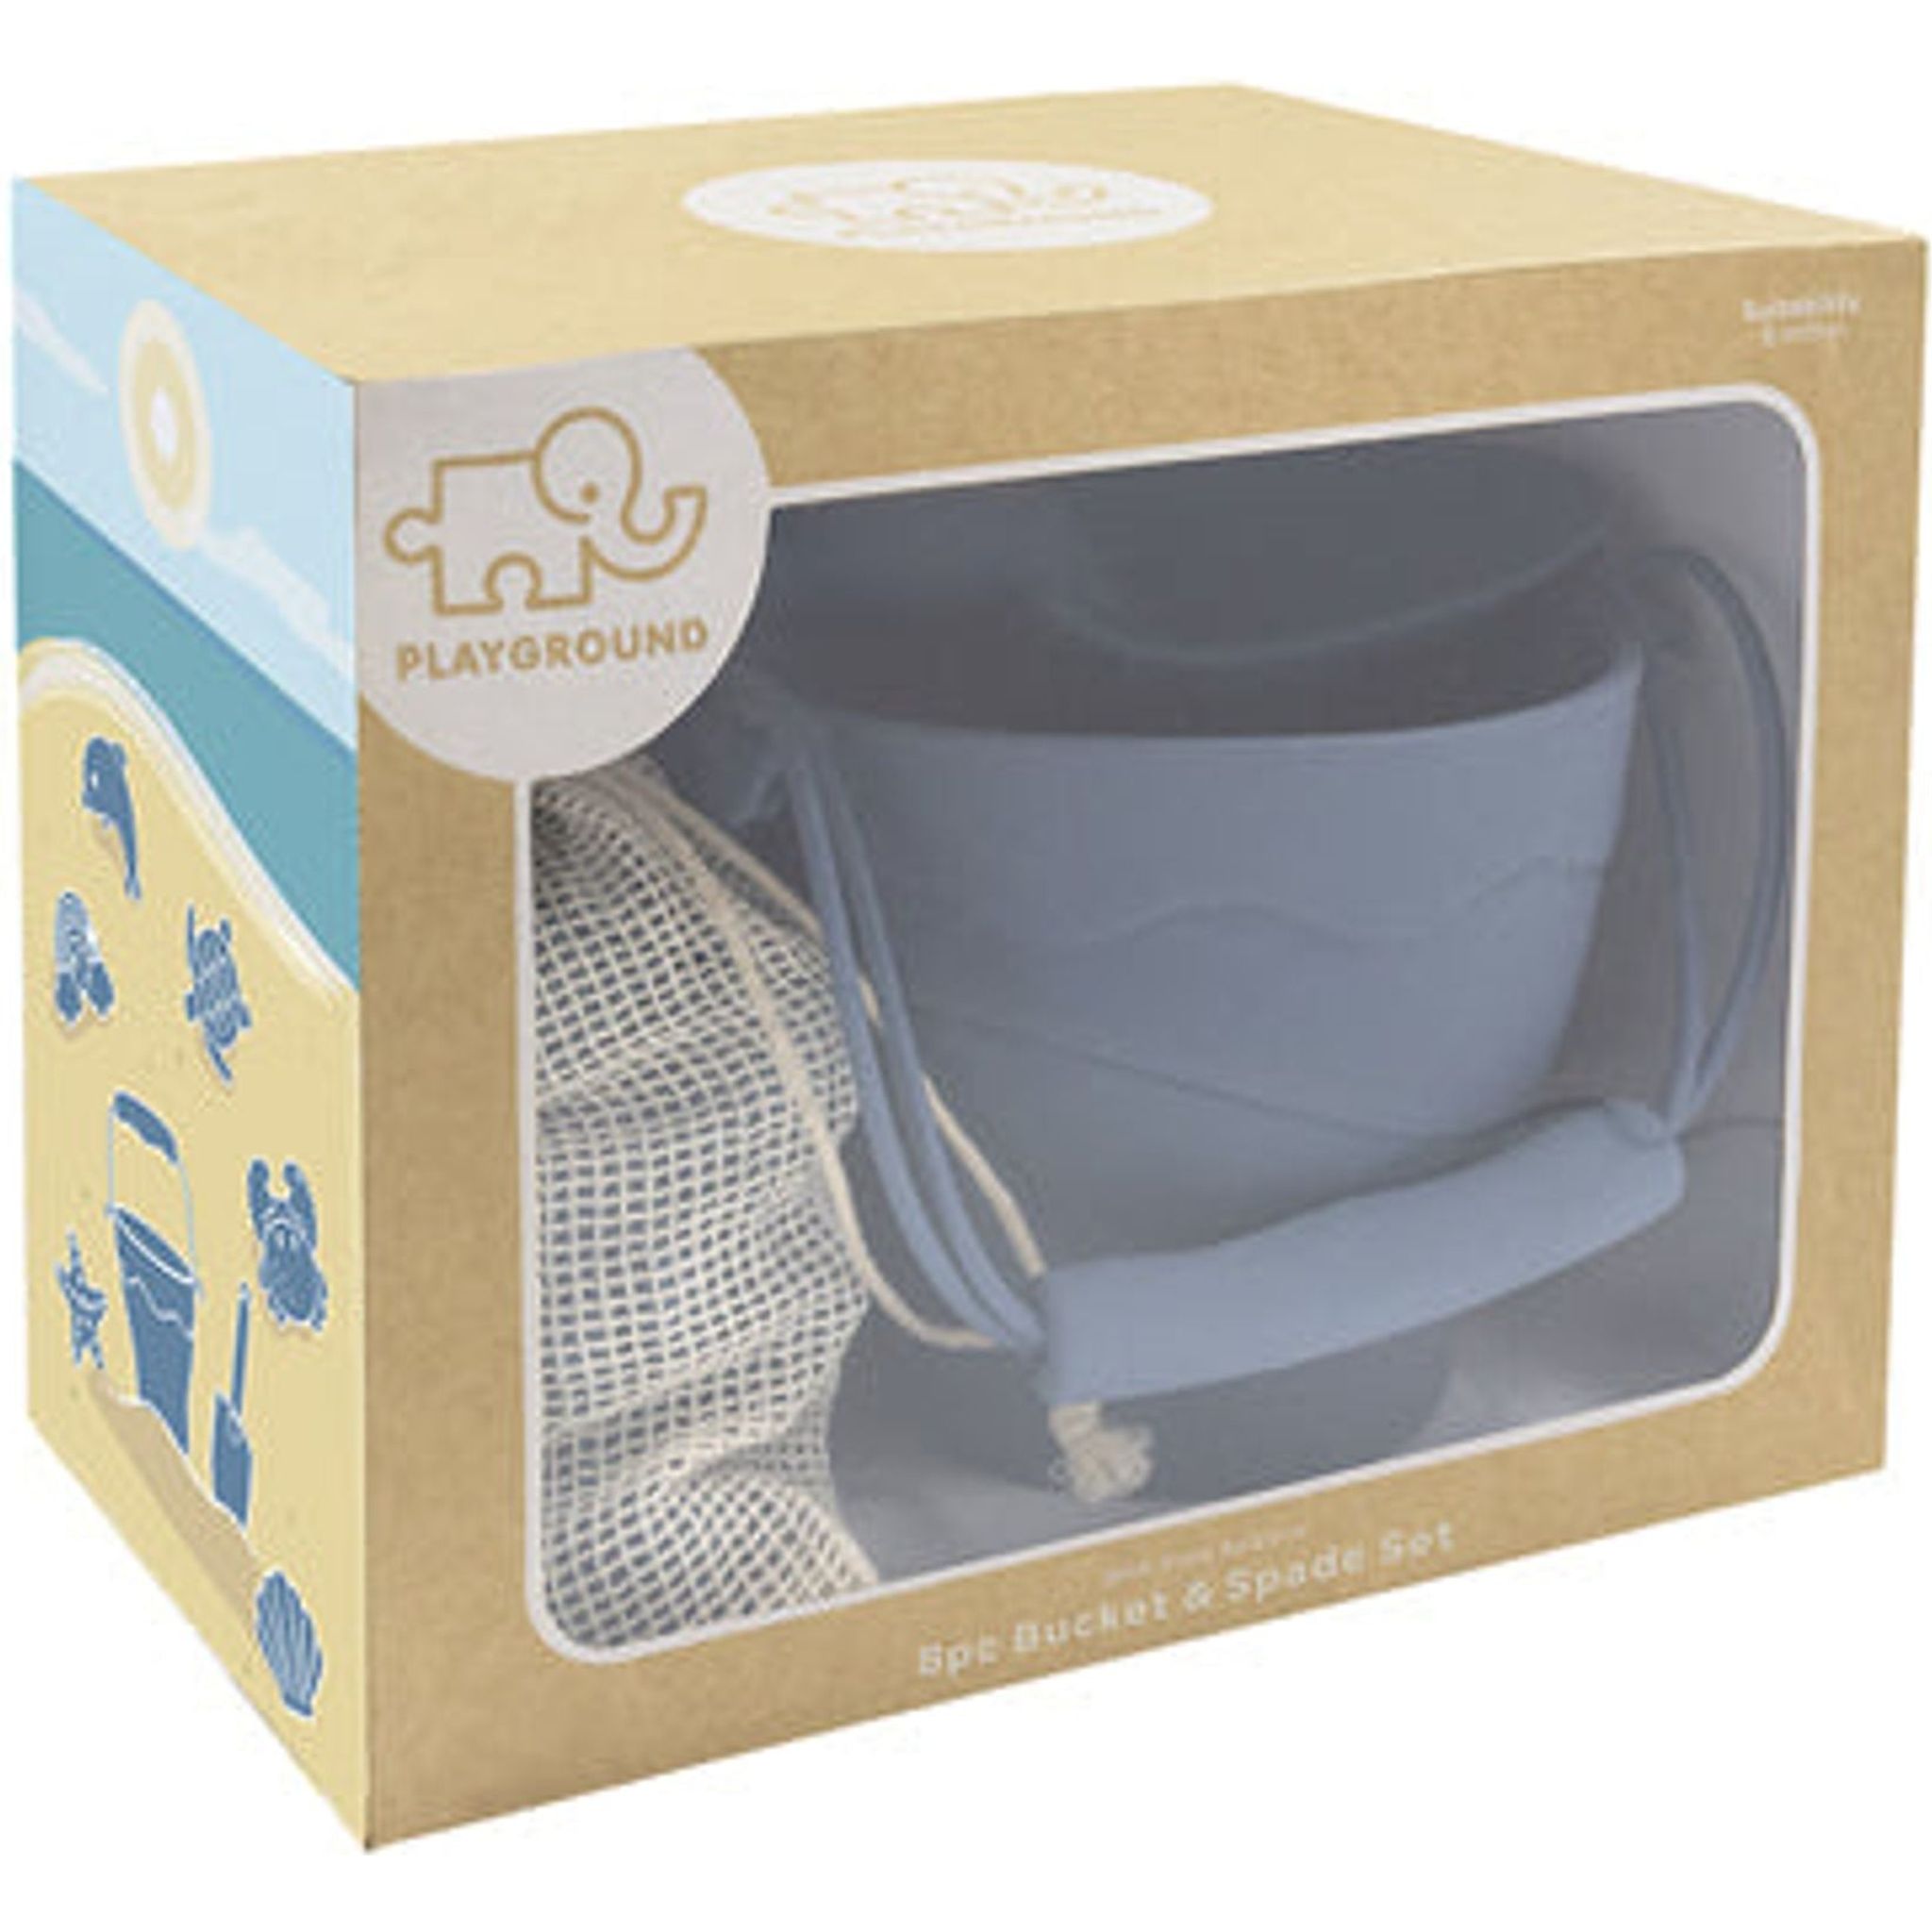 Playground Silicone 8 Piece Bucket and Spade Set - Toybox Tales